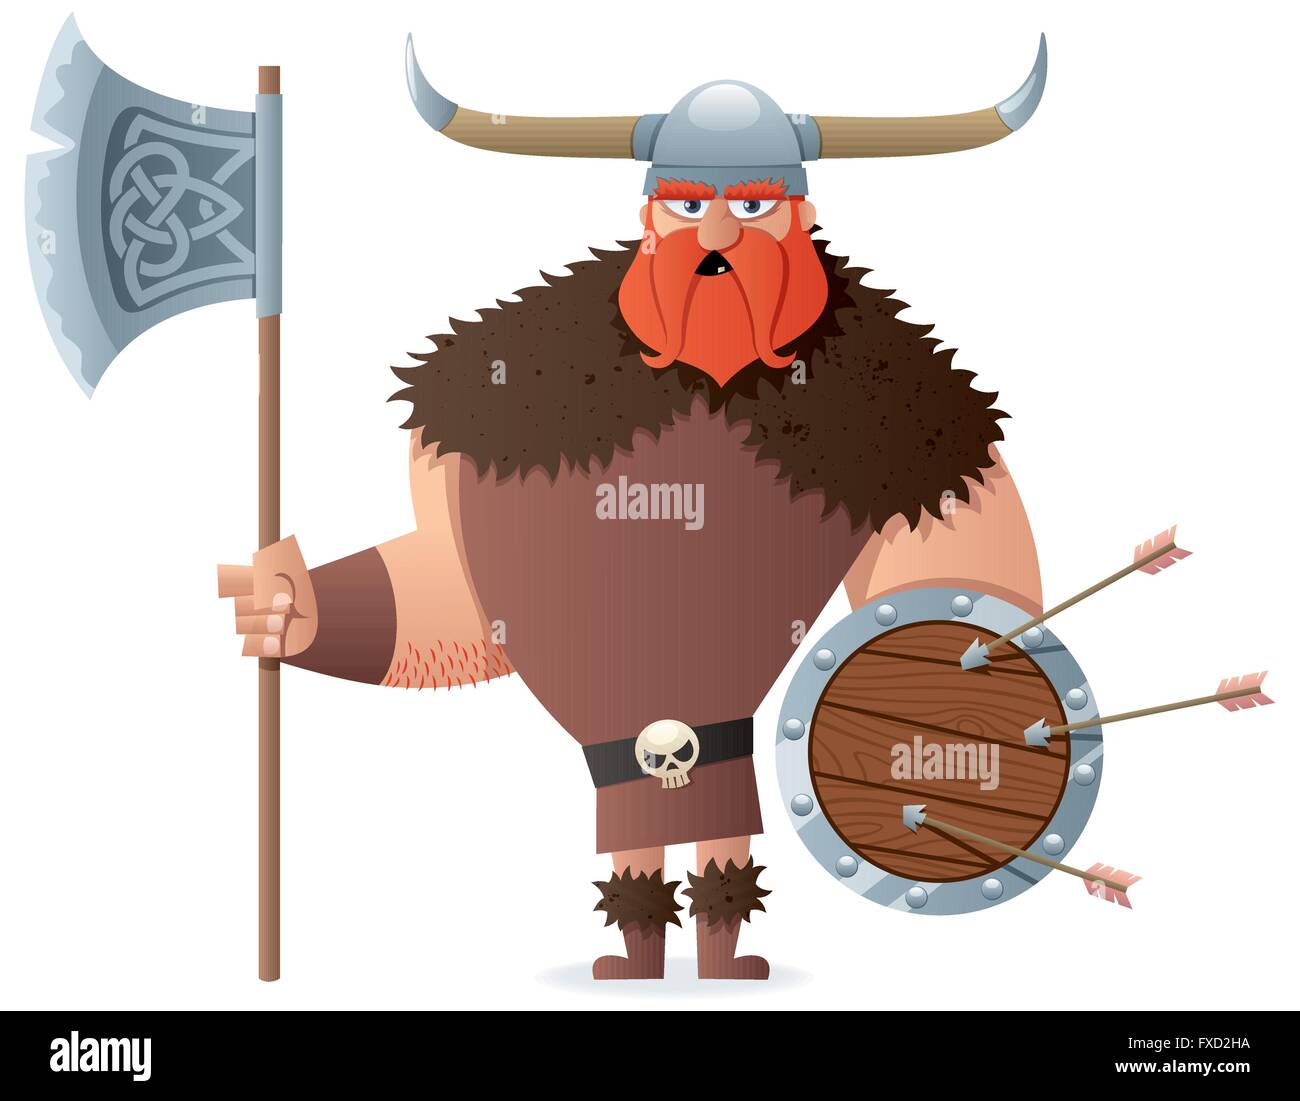 Cartoon Viking over white background. No transparency used. Basic (linear) gradients used. Stock Vector